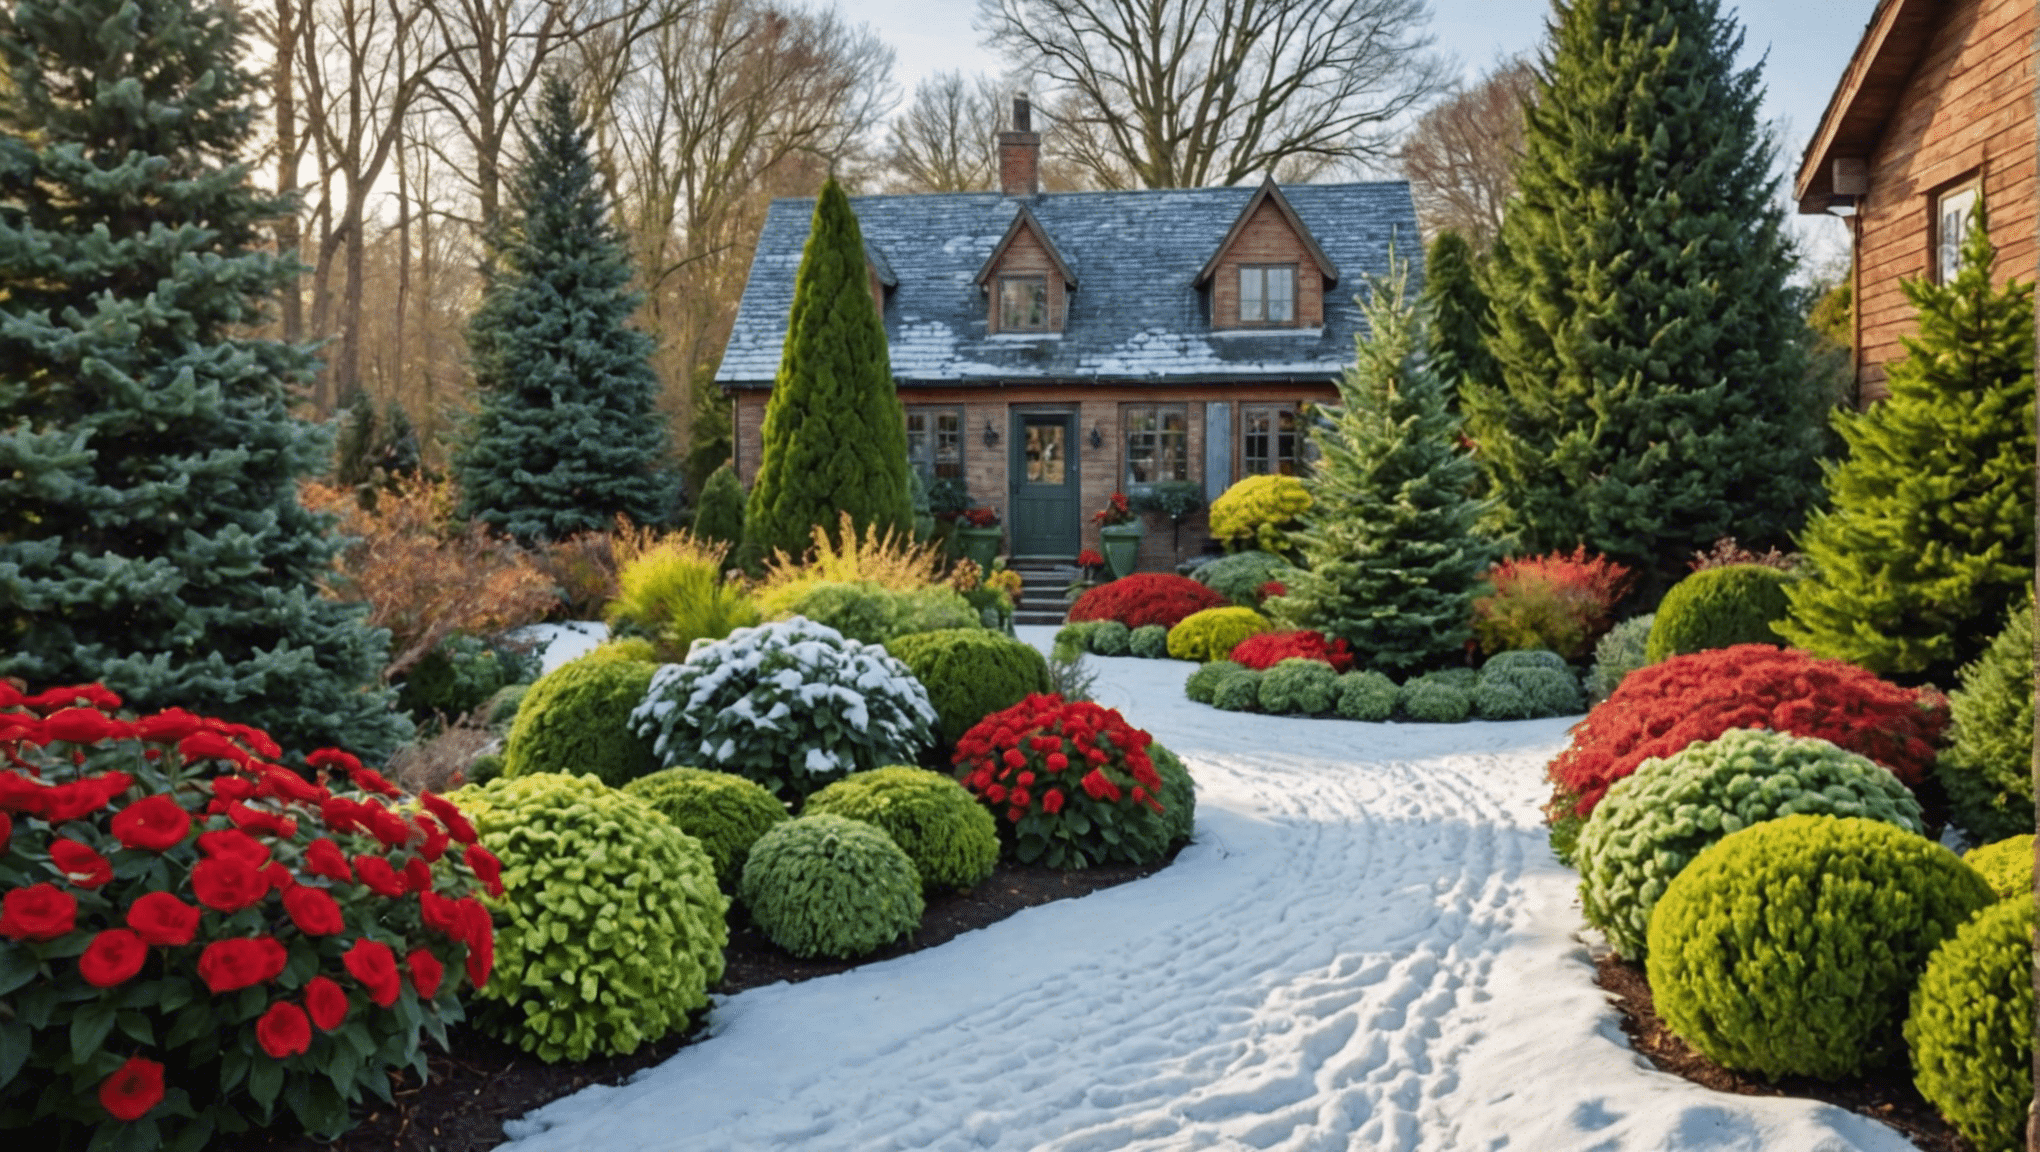 explore the latest winter gardening ideas to make the most of the season. discover tips, inspiration, and expert advice for your winter garden.